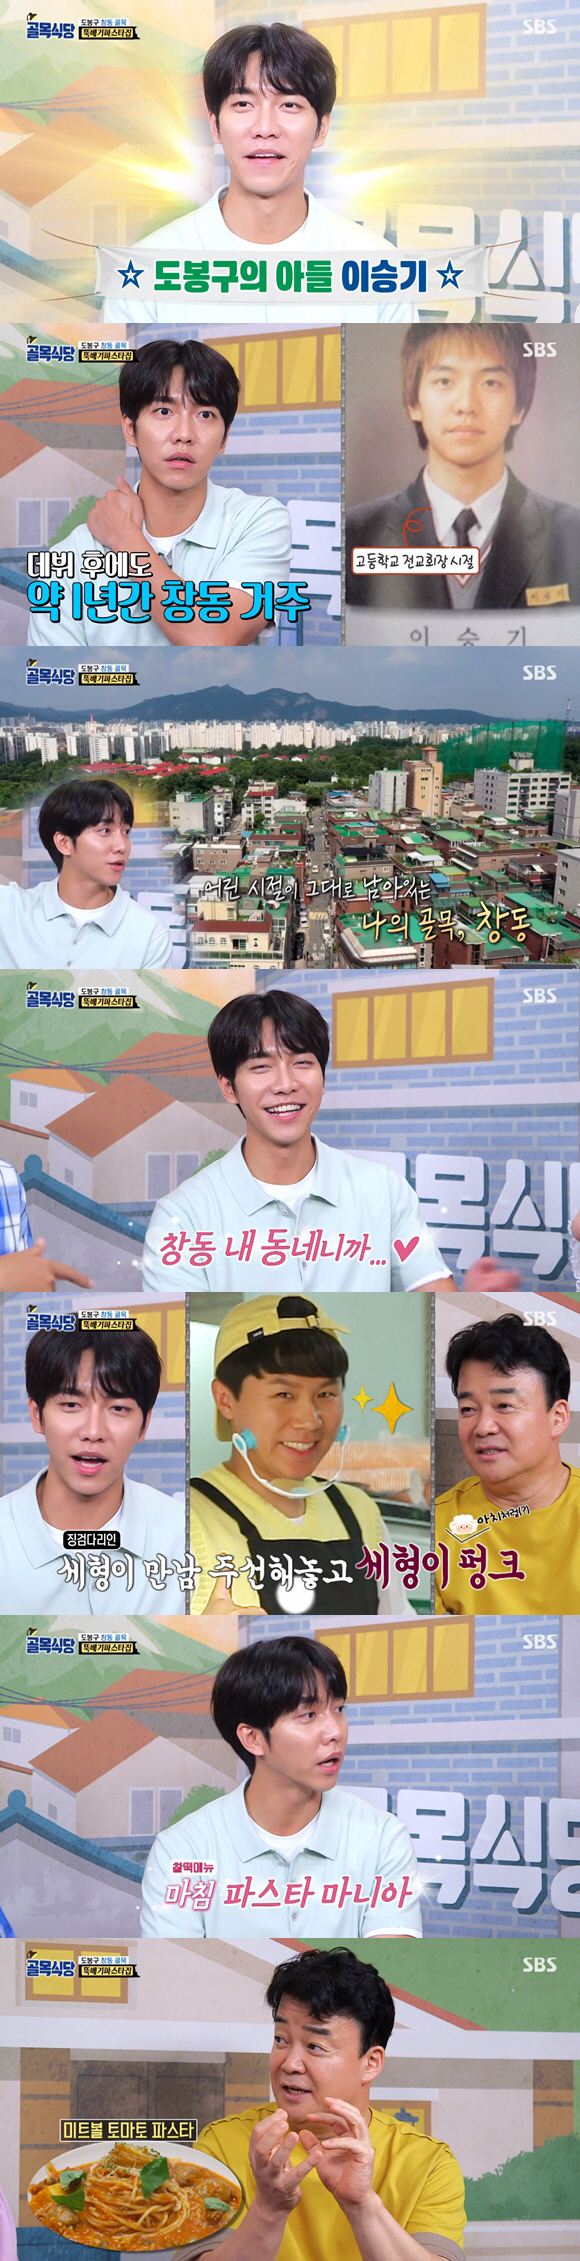 Lee Seung-gi is on SBS Baek Jong-wons The Ally Restaurant.The alley restaurant, which was broadcasted on the 19th, was released on the 25th alley Dobong District Chang-dong Alley.On this day, Lee Seung-gi, a singer of Mirry Tour, appeared in the alley.Kim Seong-joo said, The big guest came, he said. Since I first came to Chang-dong, I have to come to Lee Seung-gi like a cubic.If you do not know Lee Seung-gi, he is a spy, he said.I really admire Baek Jong-won, Seung-gi said on the day. Yang Se-hyeong arranged a meeting in the middle, but it was not possible.I thought it was a Baek Jong-won situation at first. Baek Jong-won said, I thought it was Lee Seung-gi.But it was a situation for Yang Se-hyeong, he added.Lee Seung-gi, who is known from Dobong District, visited the Ttukbaegi Pasta House after receiving a special mission from Baek Jong-won.Earlier, Baek Jong-won advised that the bosss meatball Pasta lacks personality and changed it to a special visual, and asked Lee Seung-gi to give a cool evaluation of the new visual meatball Pasta, which the boss reshaped.Lee Seung-gi, who tasted the bosss Pasta, praised it as perfect and continued to storm food.On the other hand, MC Jung In-sun was put in the Chicken Gangjeong House, a manga duo that was possessed from the first shooting to the heart of the guest as well as the guest, and decided to check the homework that the bosses studied for a week.However, Jung In-sun also attracted attention by showing the crisis that was shaken by the colorful talks of the two bosses.Baek Jong-won pointed out the sticky texture problem without crispy even though the bosss chicken gangjeong was Gangjeong, and put 2MC of Seodanggae Association into the store to find a solution.MC Kim Seong-joo helped the bosses study their texture through simple experiments, starting with the difference between chicken gangjeong and seasoned chicken.In the NO Delivery Pizza House, where all 3MCs praised with the help of Valeria Fabrizi Riccio chef last week, Valeria Fabrizi Riccio chef visited again and announced the birth of a new menu Cotalia Pizza with Korean pepper oil added to authentic Italian pizza.Kim Seong-joo X Jung In-sun, who sampled NEW pizza with a swollen expectation, praised it as flavory.